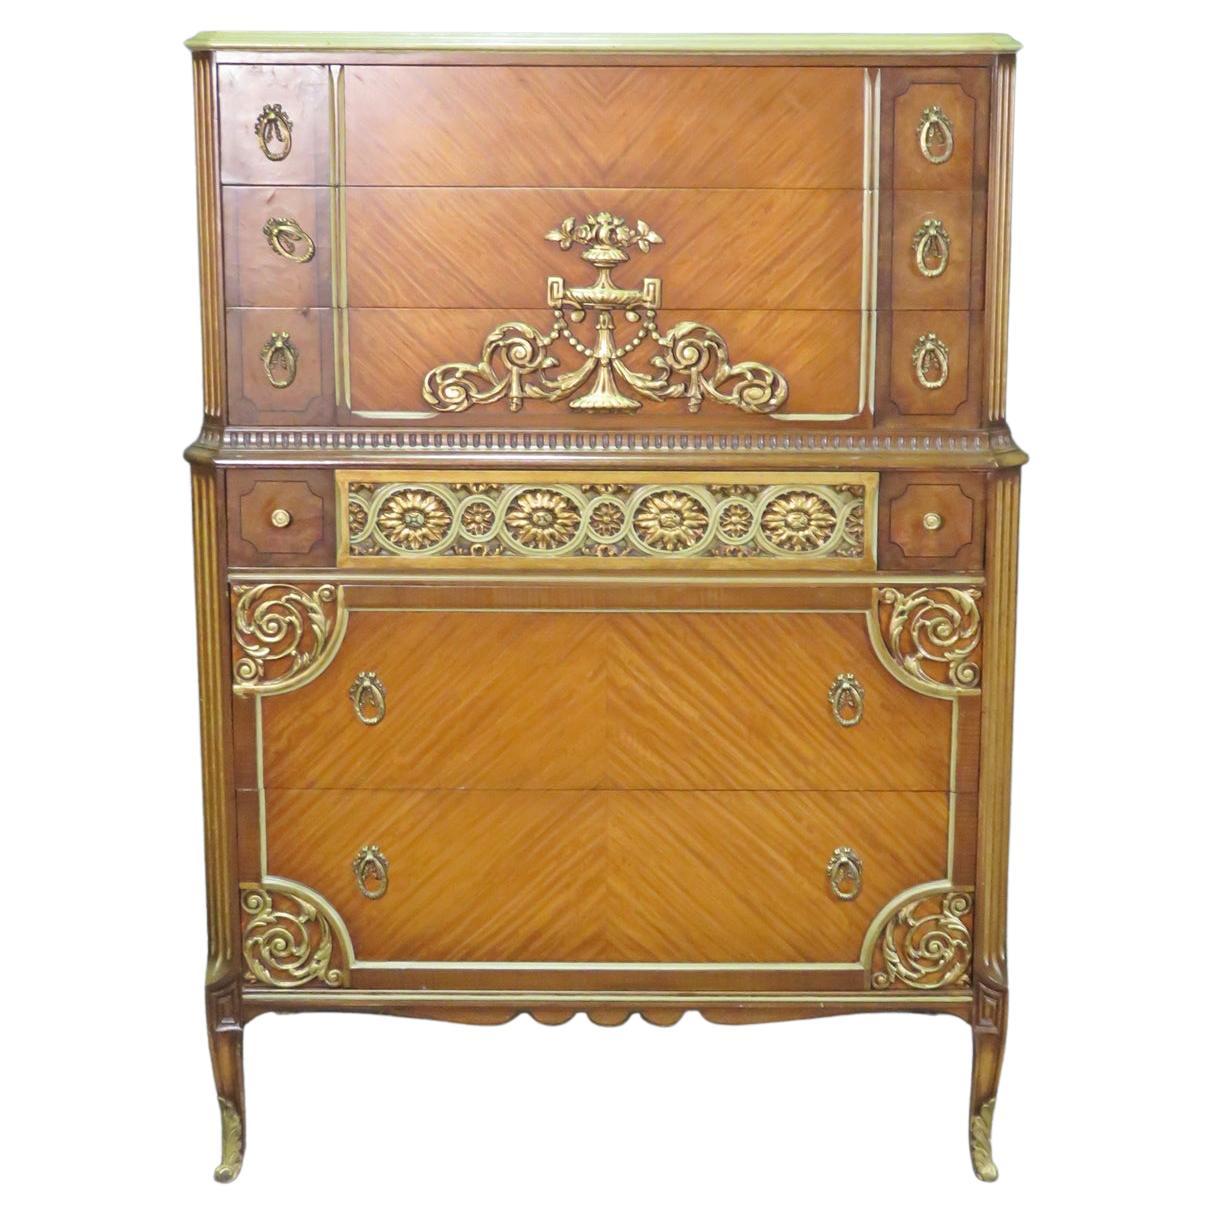 Satinwood 1920s American French Louis XV Style Tall Dresser, Circa 1920